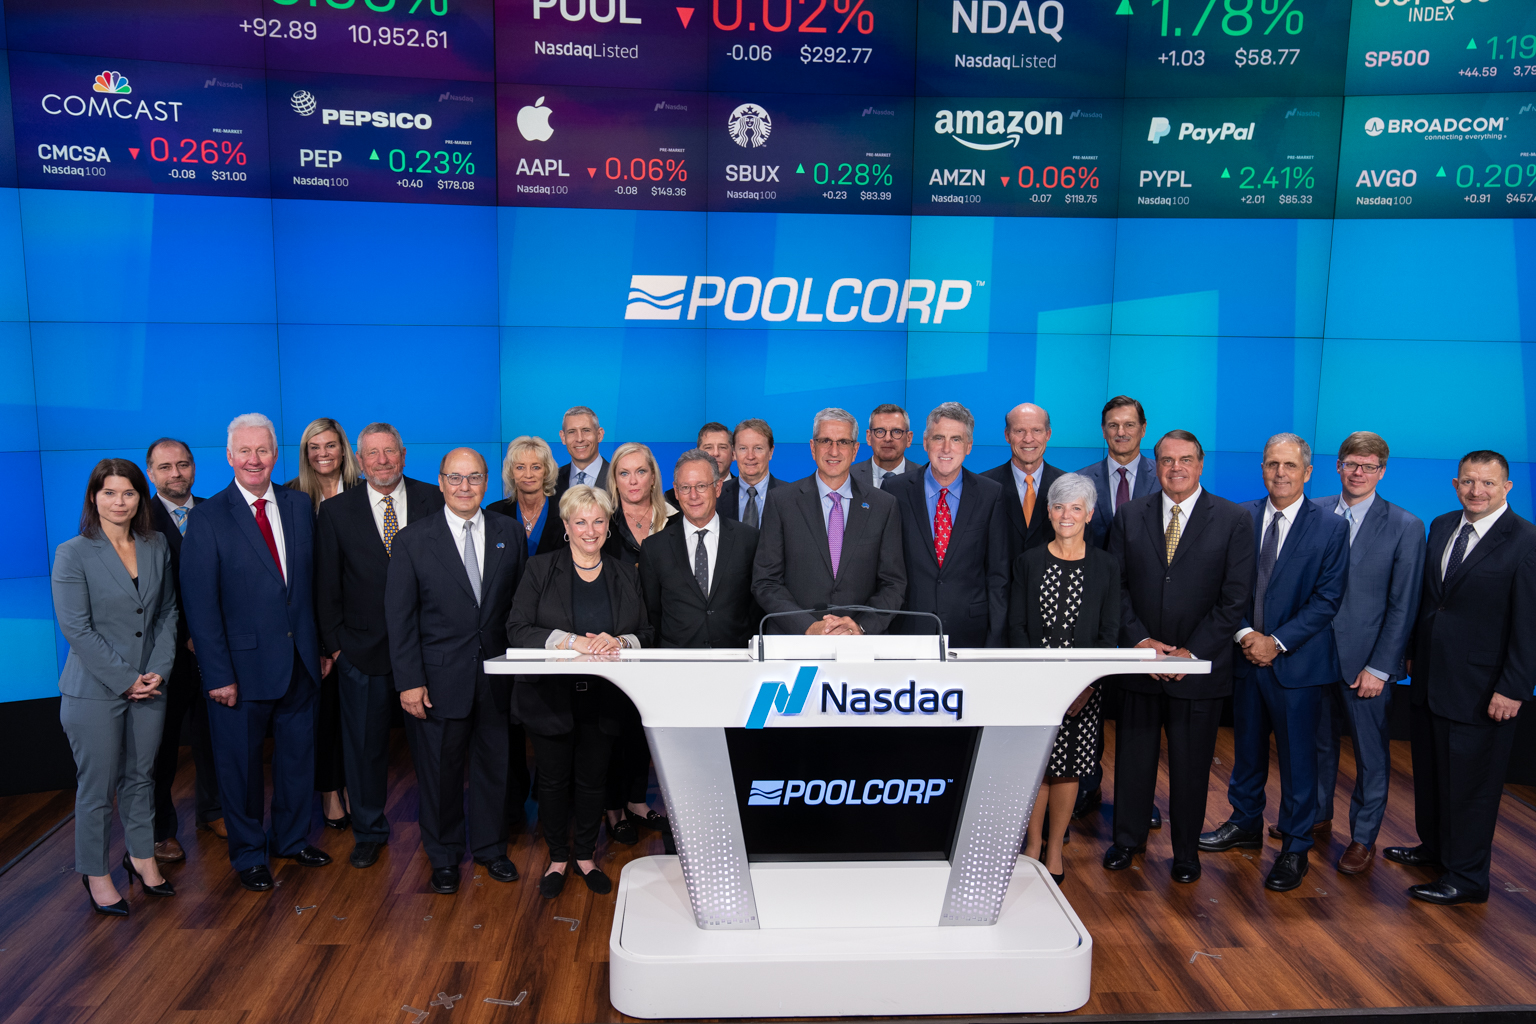 NASDAQ Congratulates POOLCORP on 25 years of being listed on the exchange